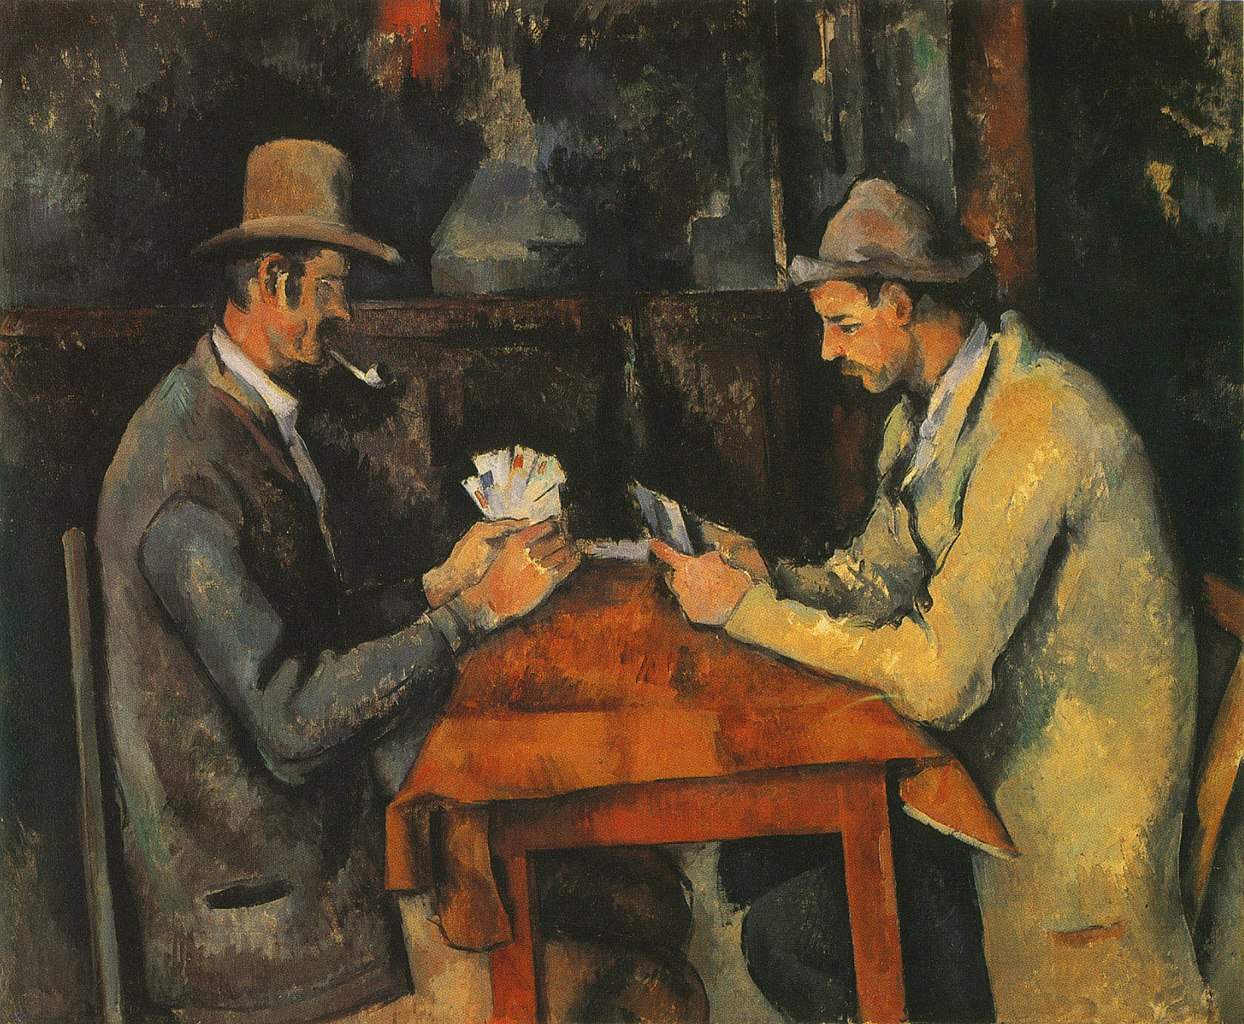 Paul CÃ©zanne. Life and works of the painter who invented 20th century art.